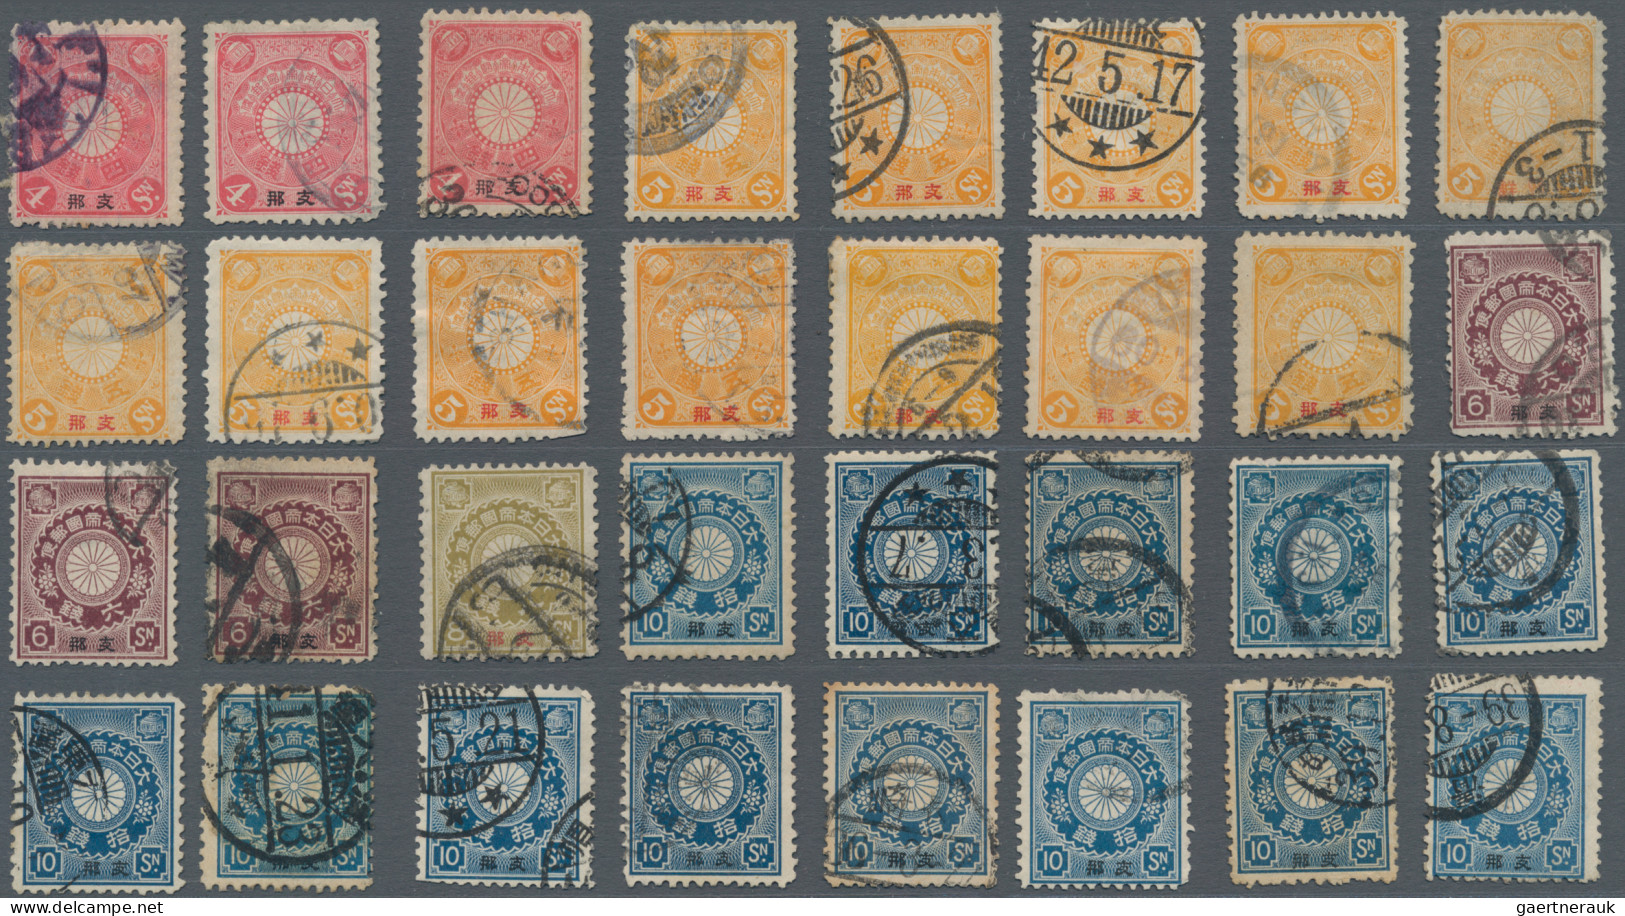 Japanese Post in China: 1900/1919, mint (inc. no gum and regum) and predominantl